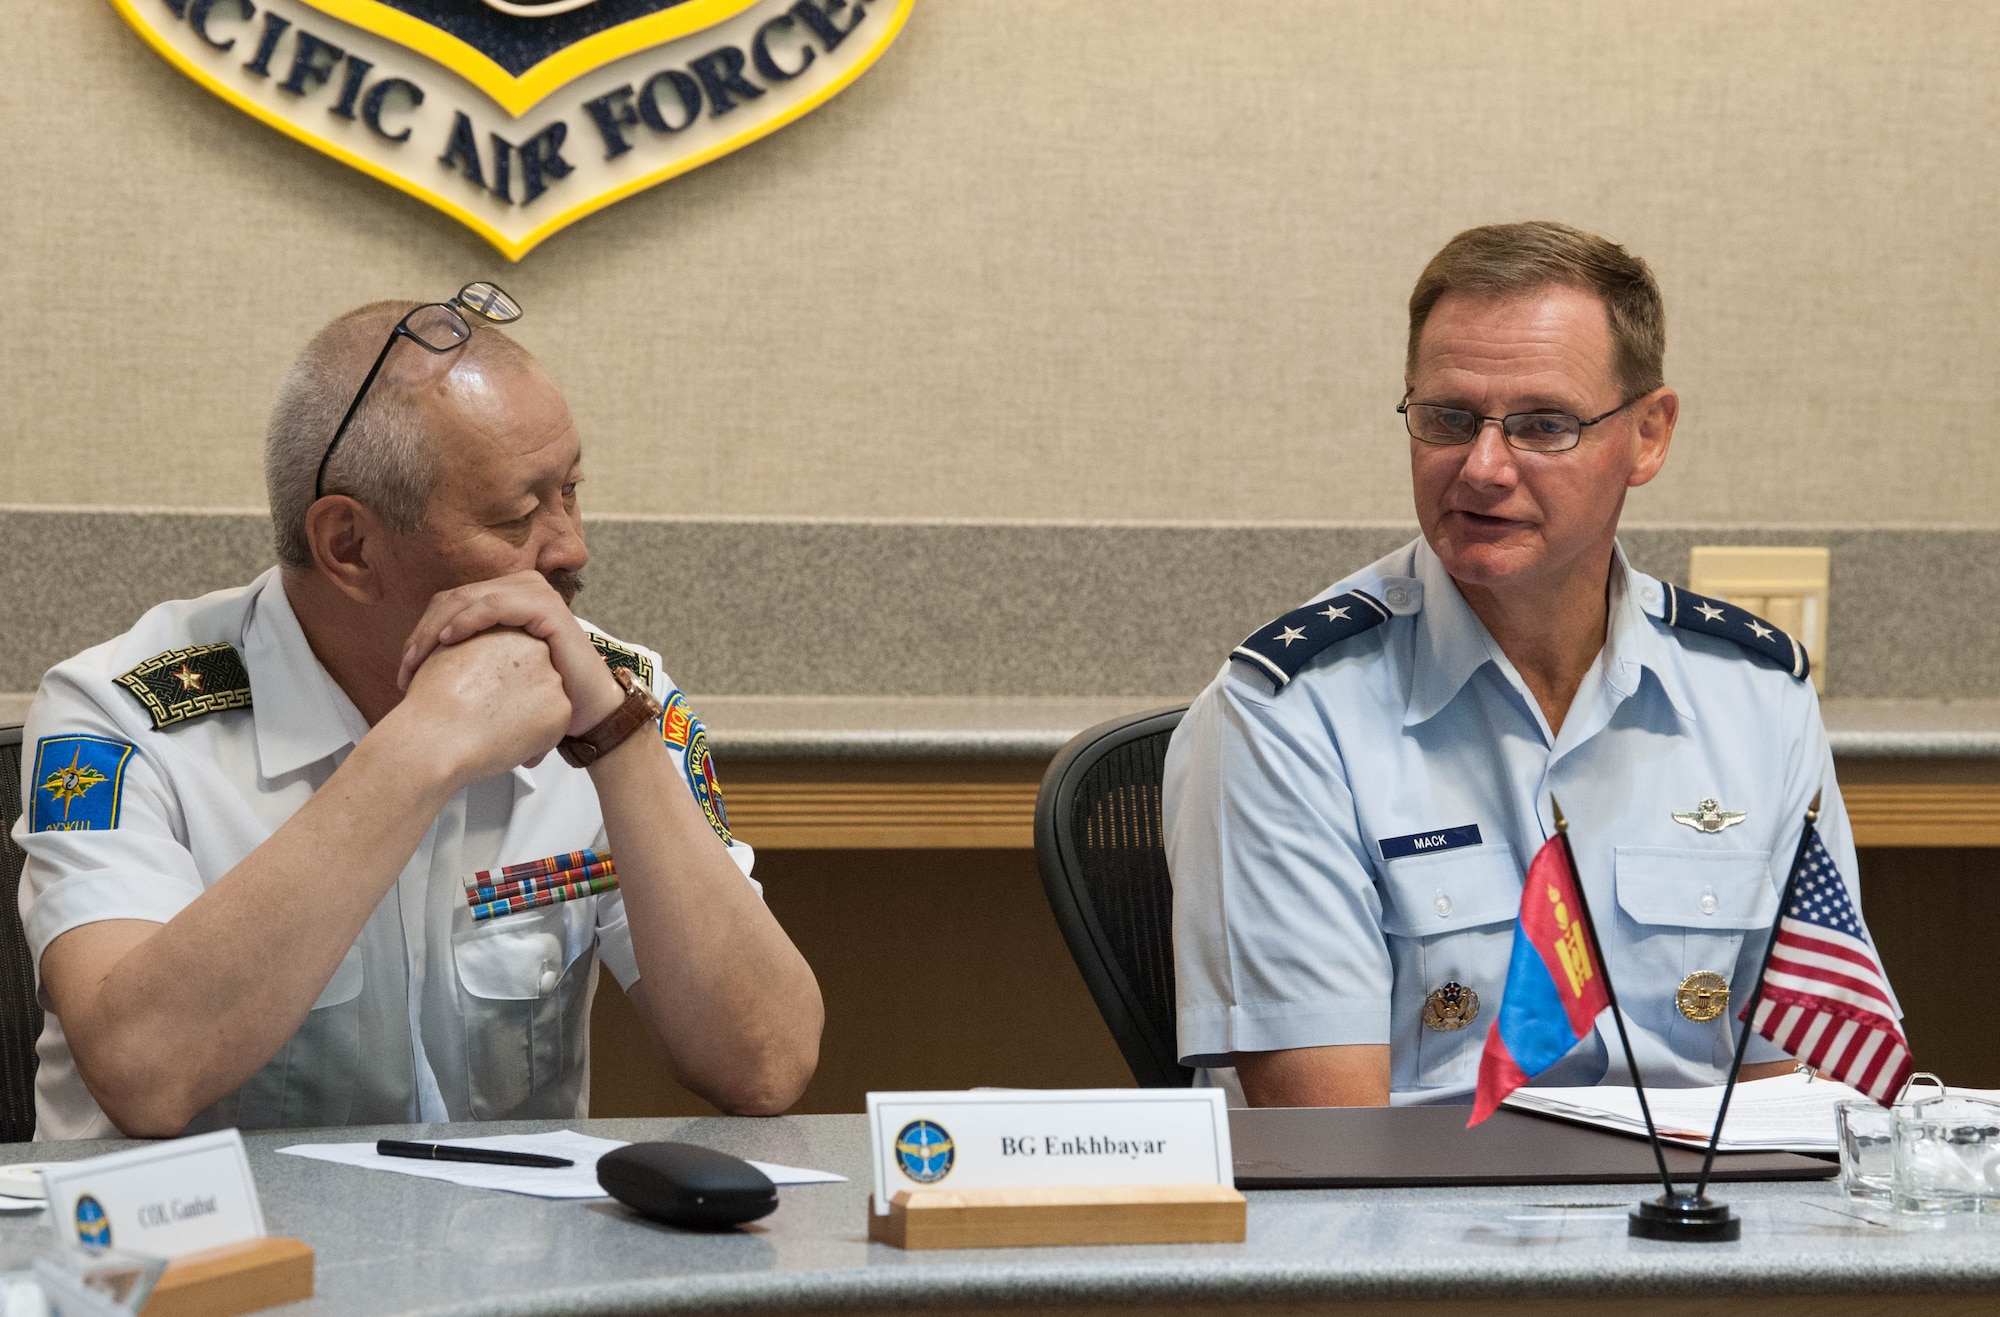 Commander of the Mongolian Air Force Command Brig. Gen. Enkhbayar Ochir and Pacific Air Forces Deputy Commander Maj. Gen. Russ Mack participate in the first Airman-to-Airman talks between the two nations’ air forces at Headquarters PACAF, Joint Base Pearl Harbor-Hickam, Hawaii, March 27, 2019.